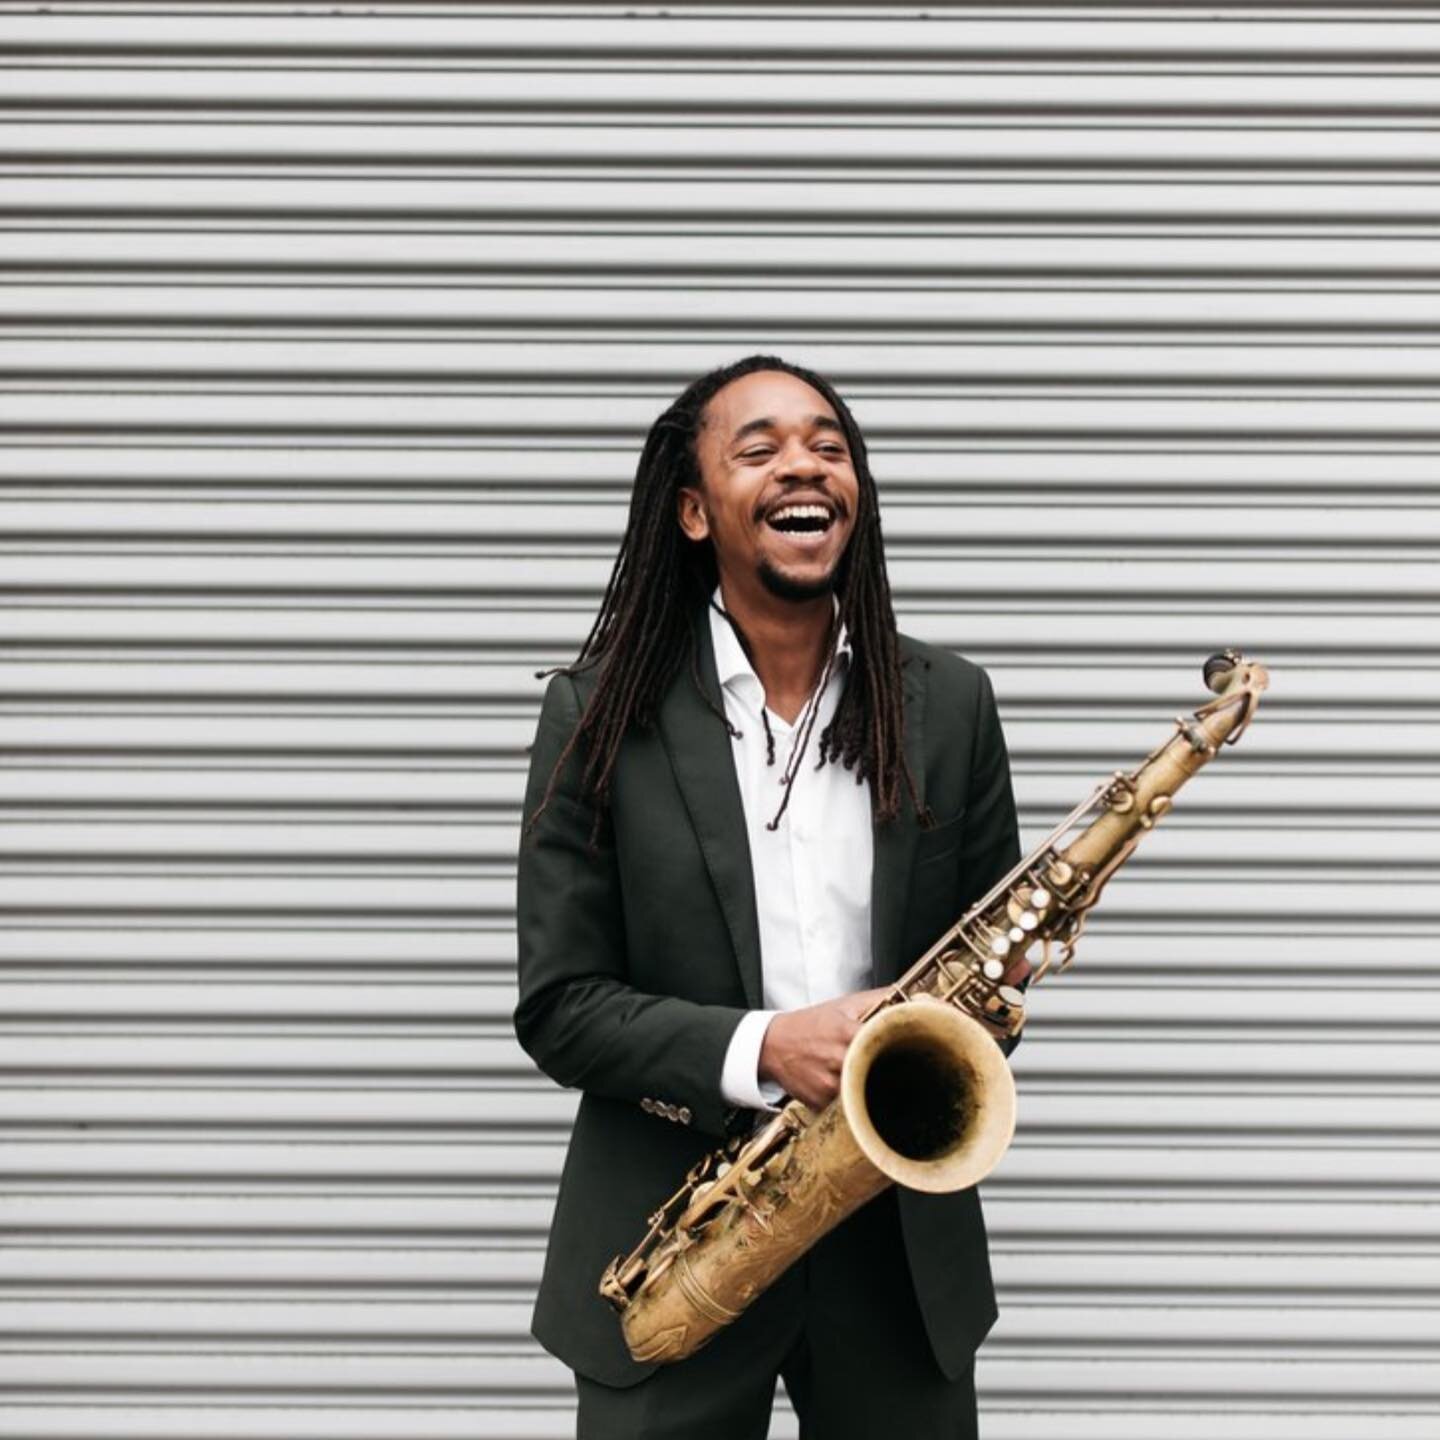 Tonight at 6p we have Kaz George and his trio ! Tyrone Allen on bass, &amp; Kayvon Gordon on the drums. Kazemde George is an African American jazz saxophonist, composer, and beat-maker based in Brooklyn who exhibits a gift for streamlined, emotionall